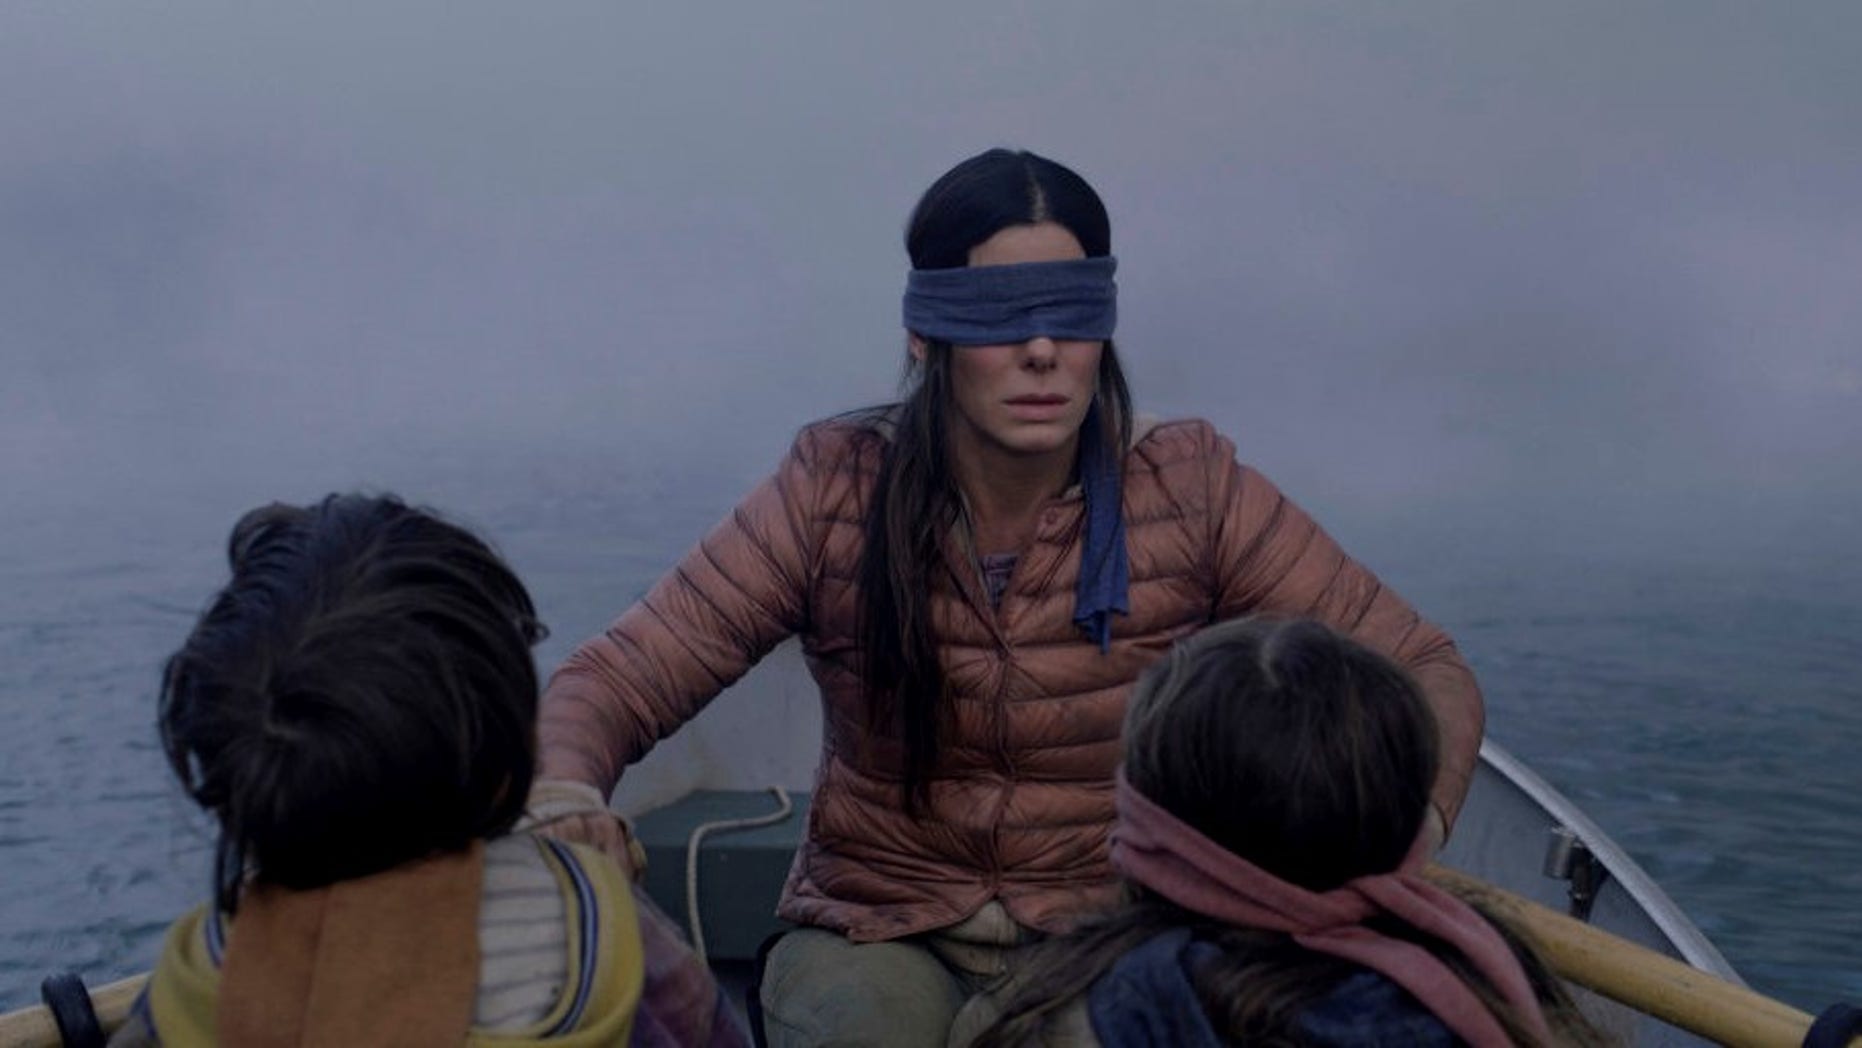 ‘Bird Box’ challenge inspired by Netflix movie prompts streaming service to issue warning